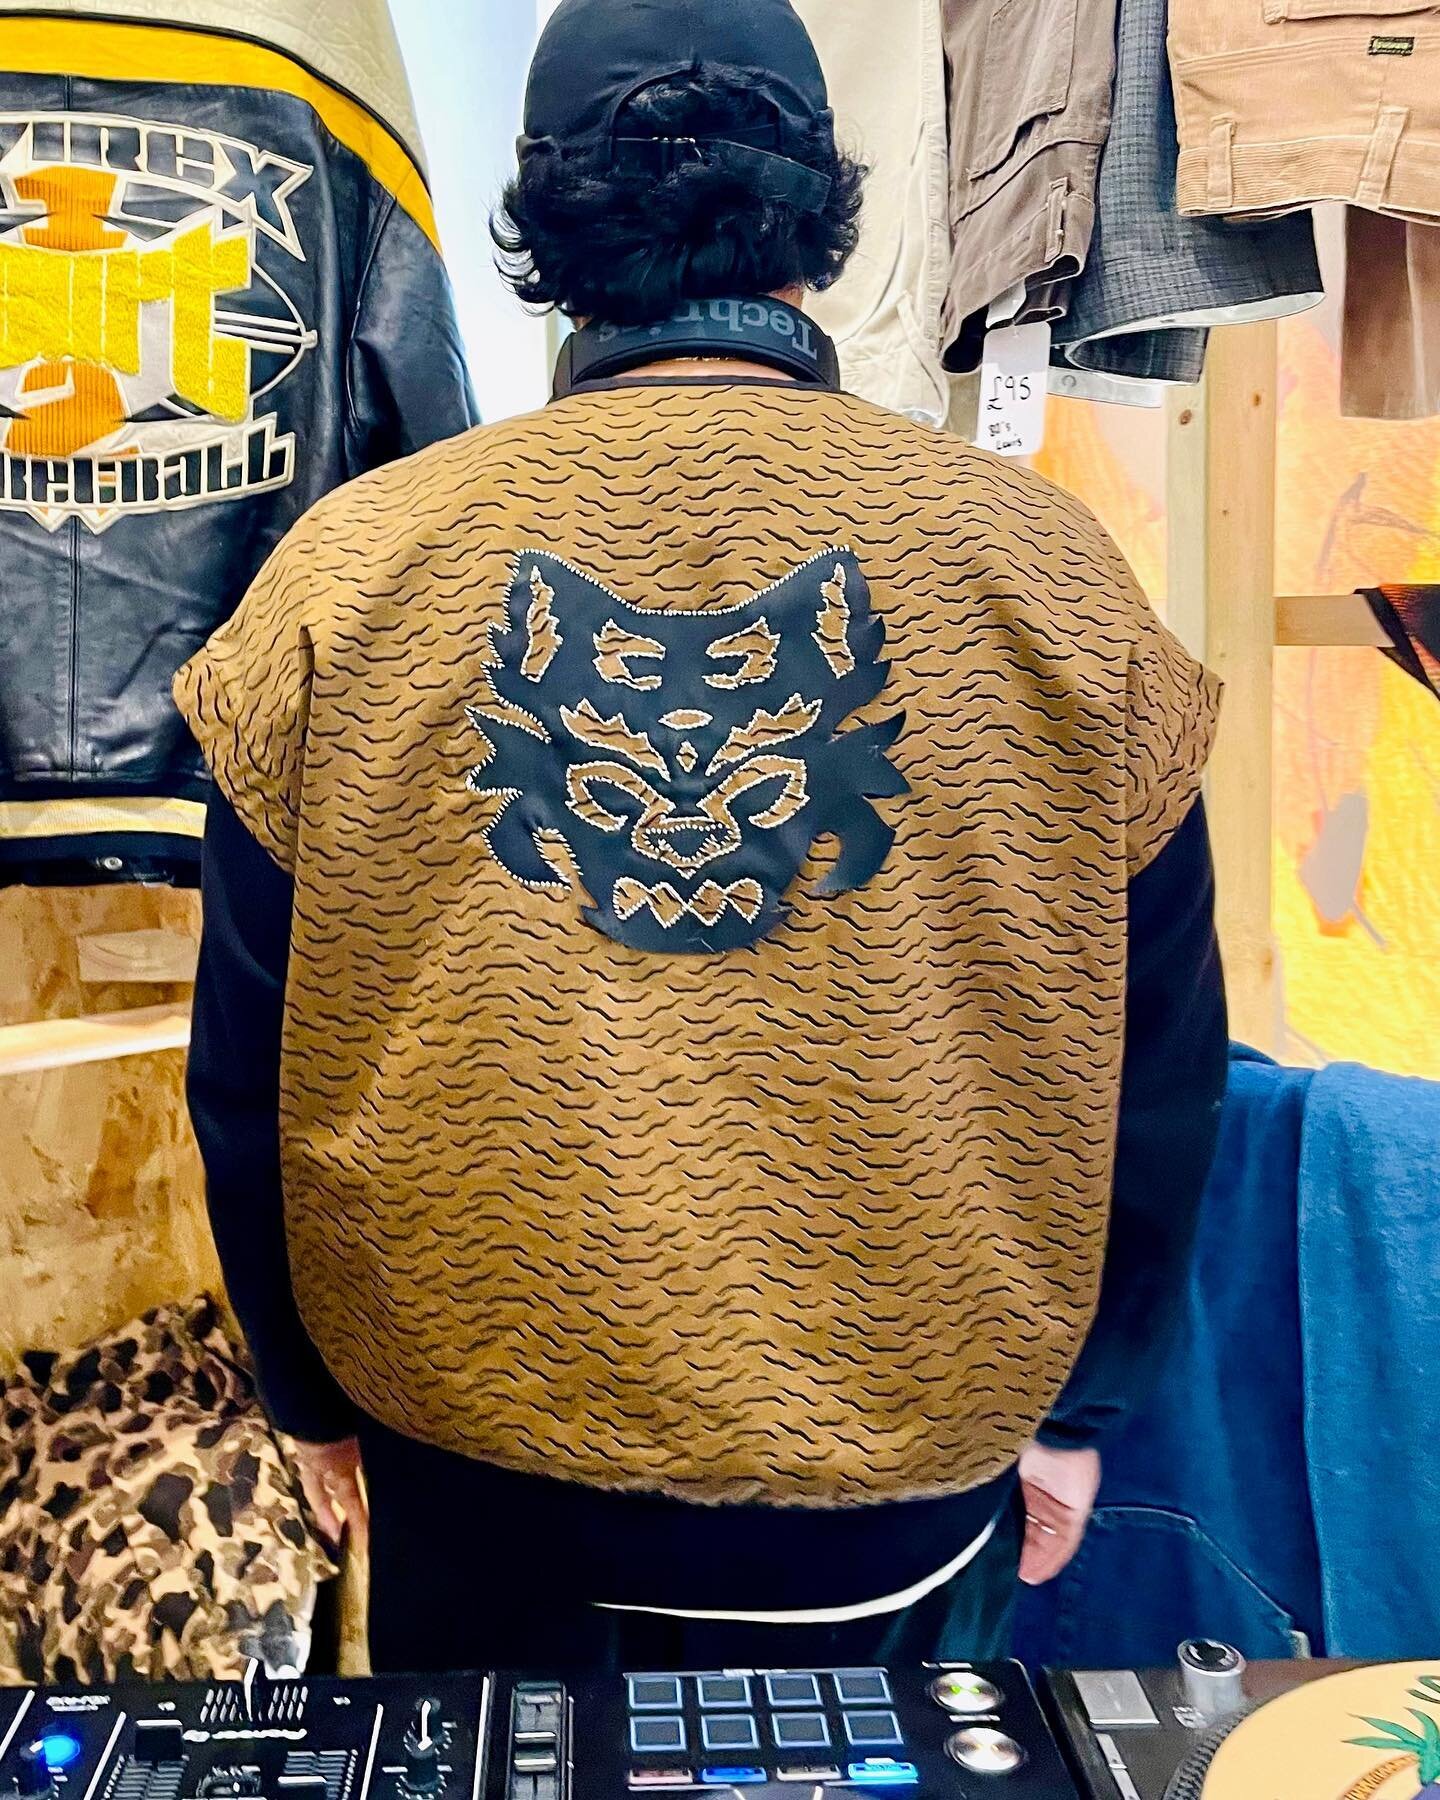 System Piece no 6. 
Reversible Bomber with detachable sleeves. 
Customised Tiger appliqu&eacute; using waste fabric. 
Farewell Year of the Tiger 🐯🧧

DM for enquiries. 
.
#modular #reversible #tiger #chinesetiger #yearofthetiger #customised #special